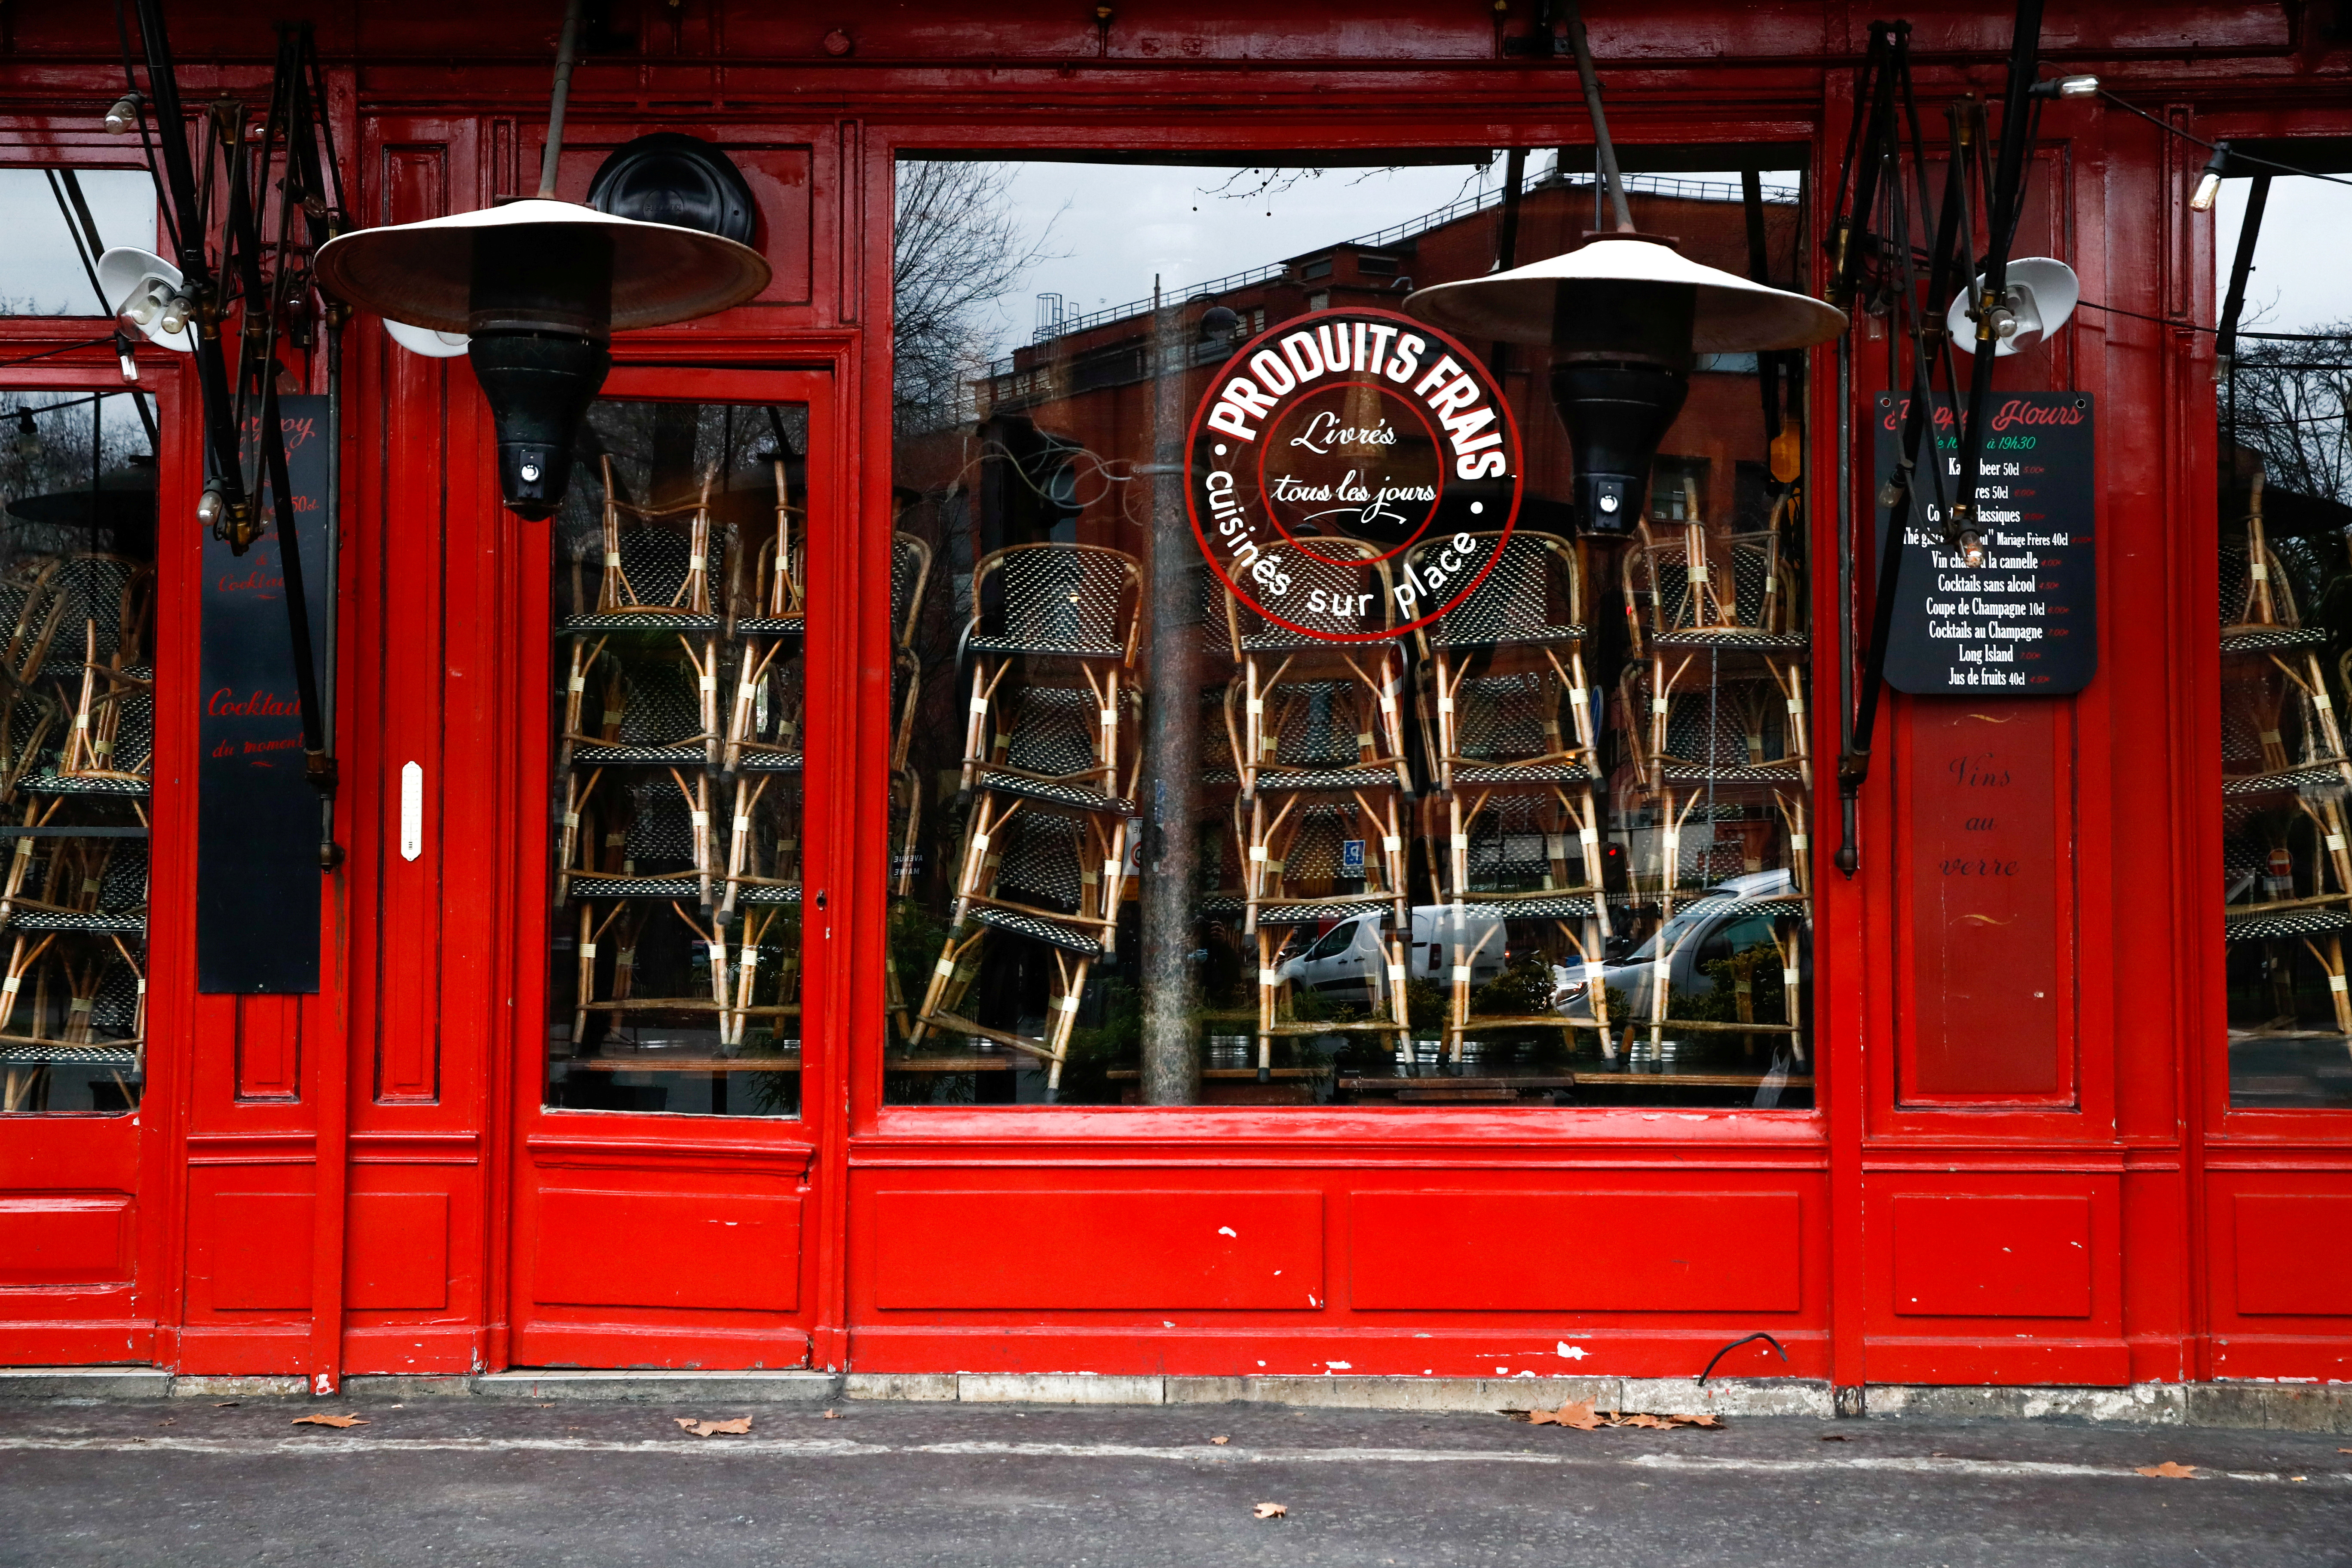 A view shows chairs stacked inside a closed restaurant in Paris as the French government keeps bars and restaurants closed as part of COVID-19 restrictions measures to fight the coronavirus disease outbreak in France, January 5, 2021. REUTERS/Gonzalo Fuentes